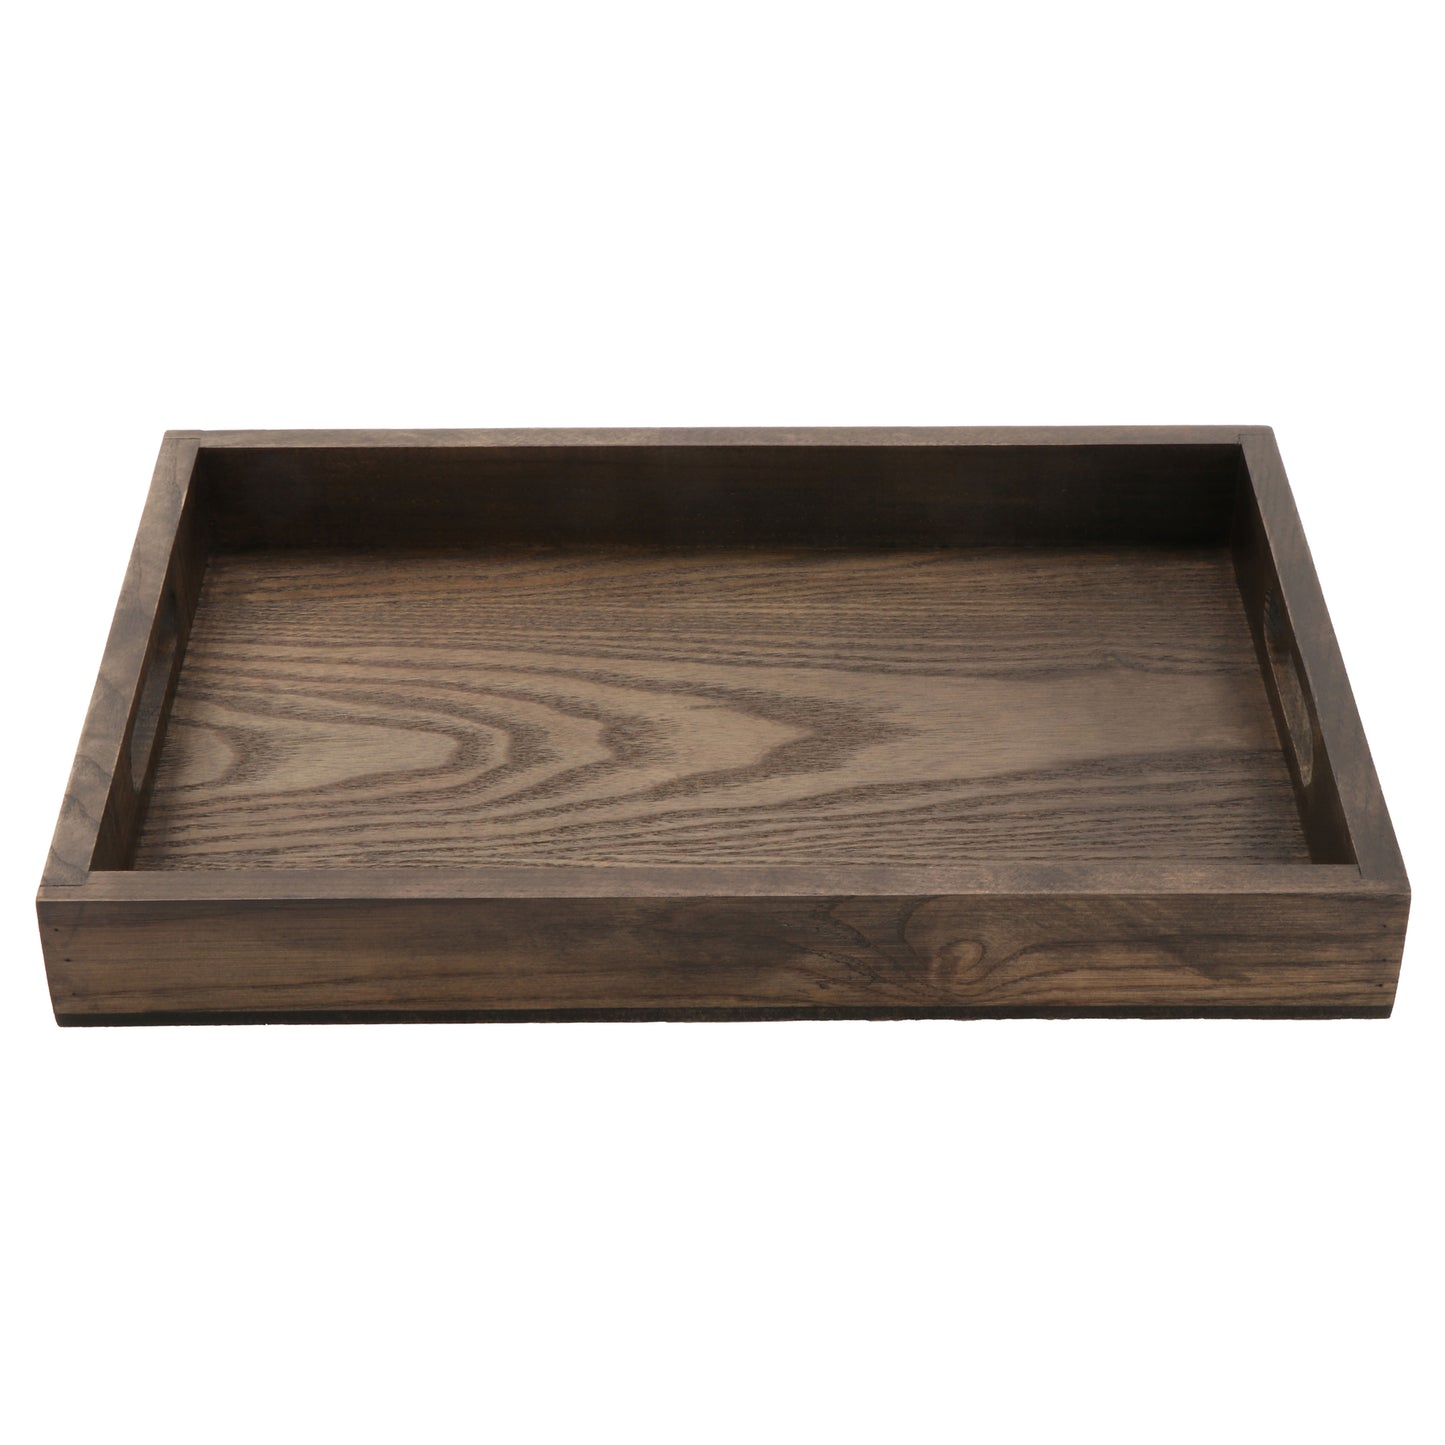 14.25" x 9.5" Small Rectangular Walled Ash Wood Serving Tray with Handles, 1.75" tall, G.E.T. Taproot